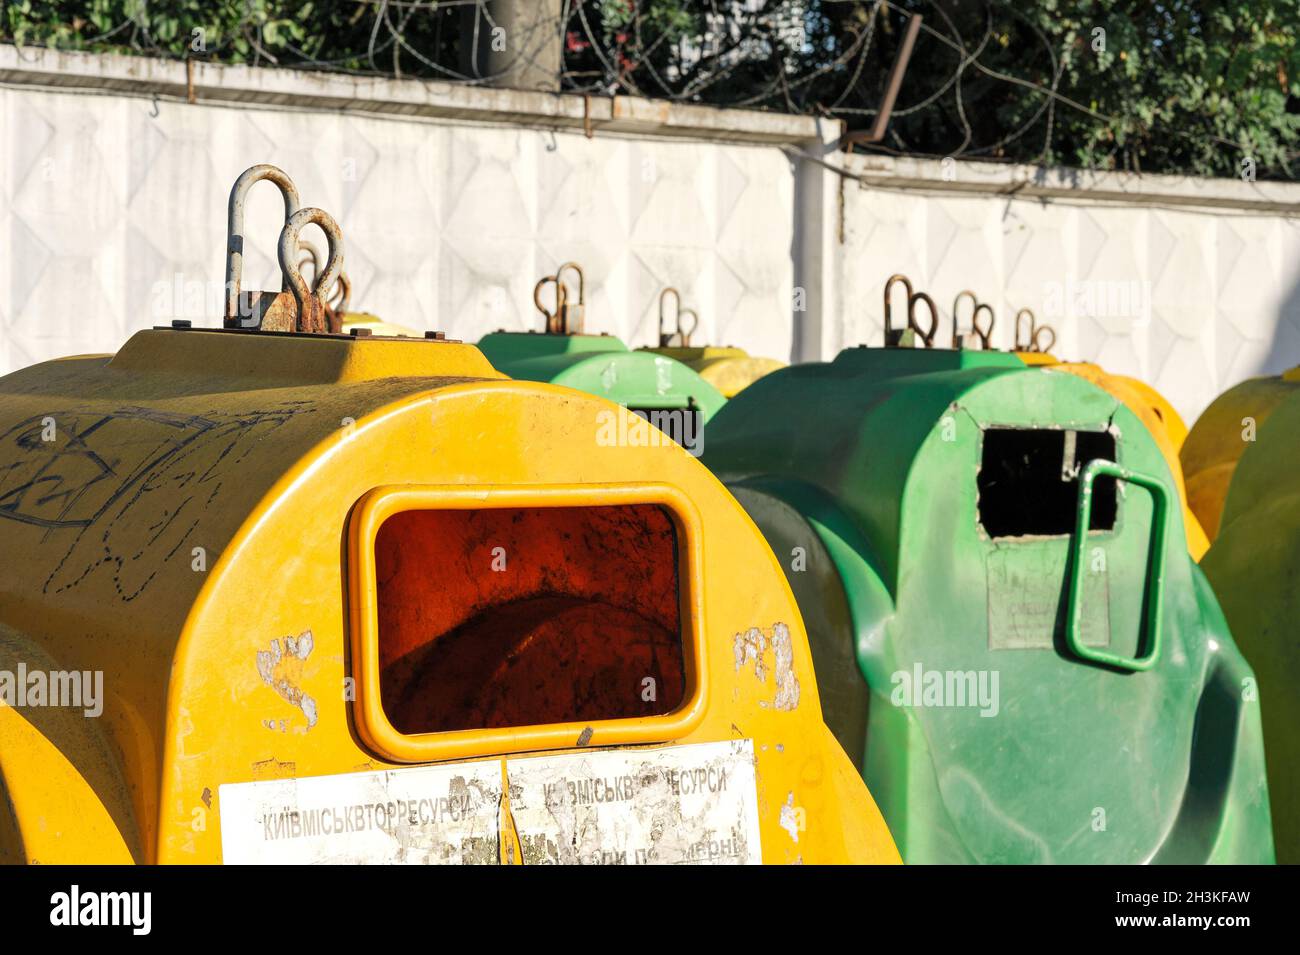 Colored Waste Bins for Sorting Waste by Category. Stock Photo